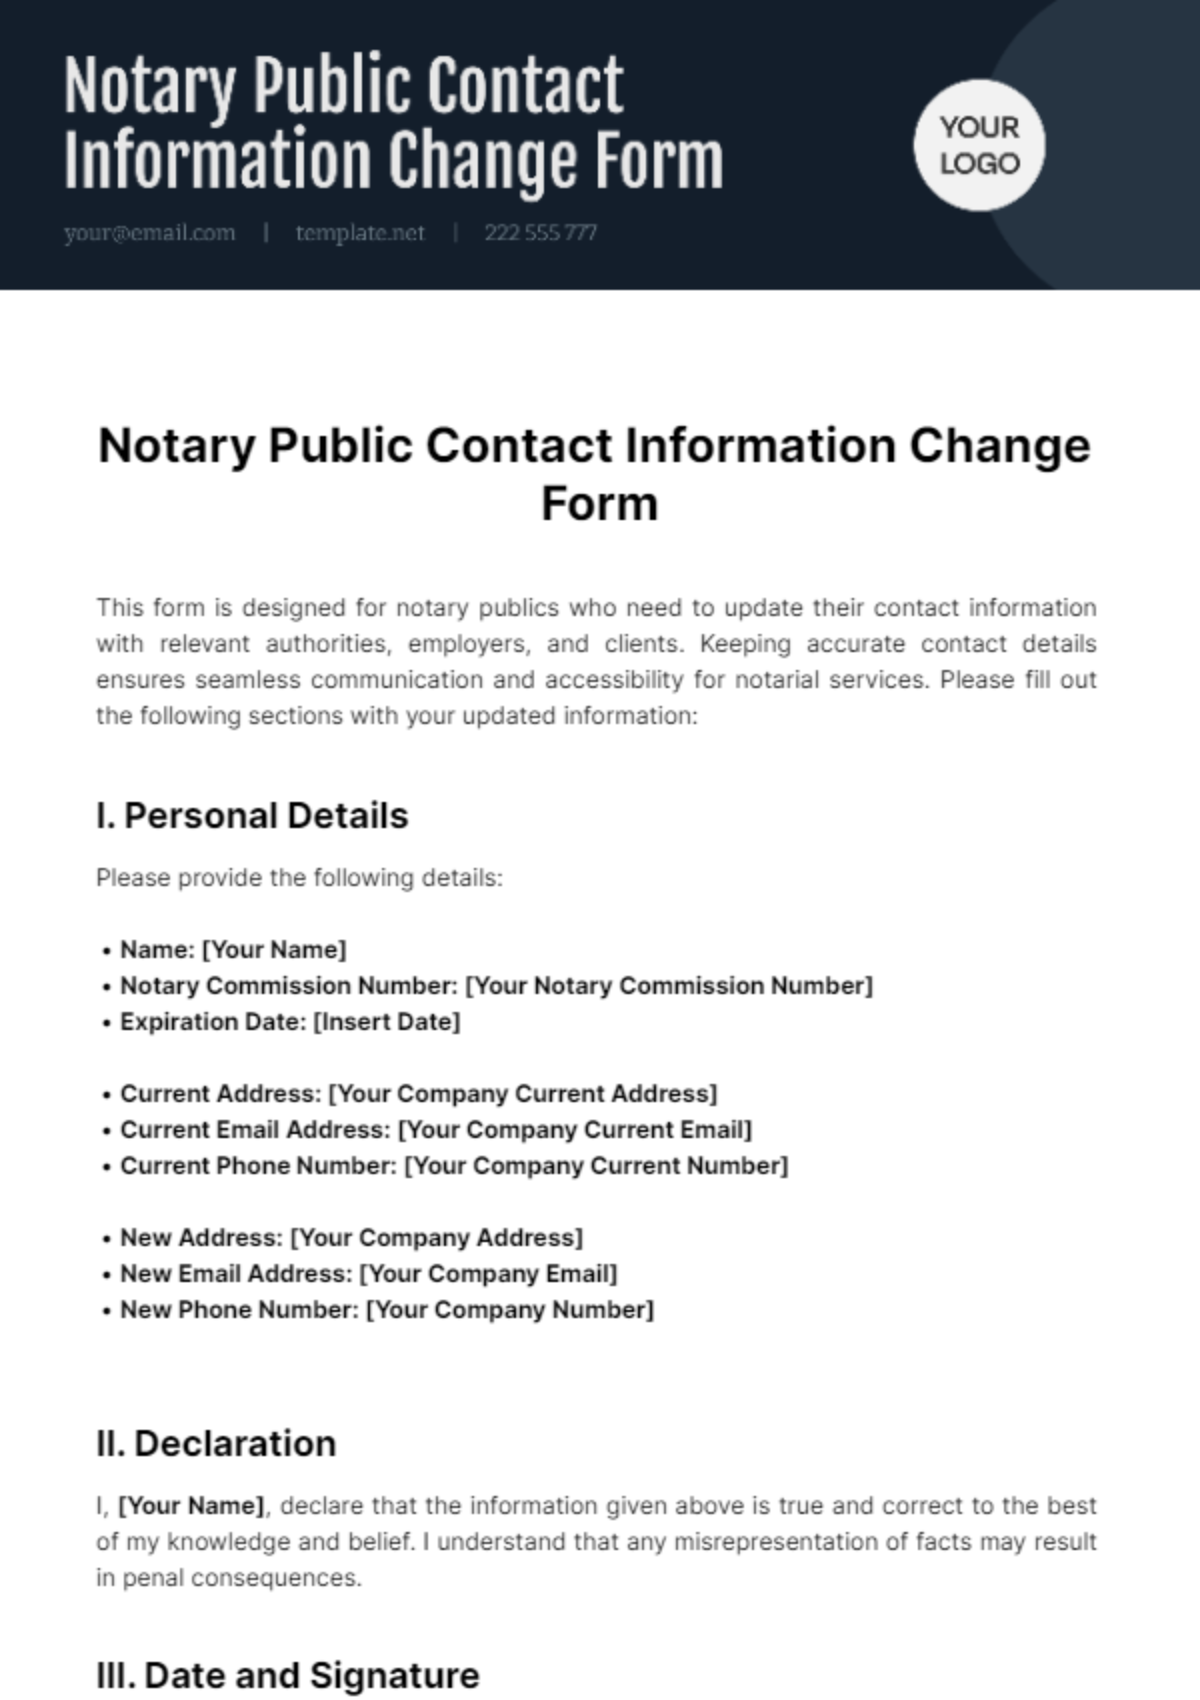 Free Notary Public Contact Information Change Form Template